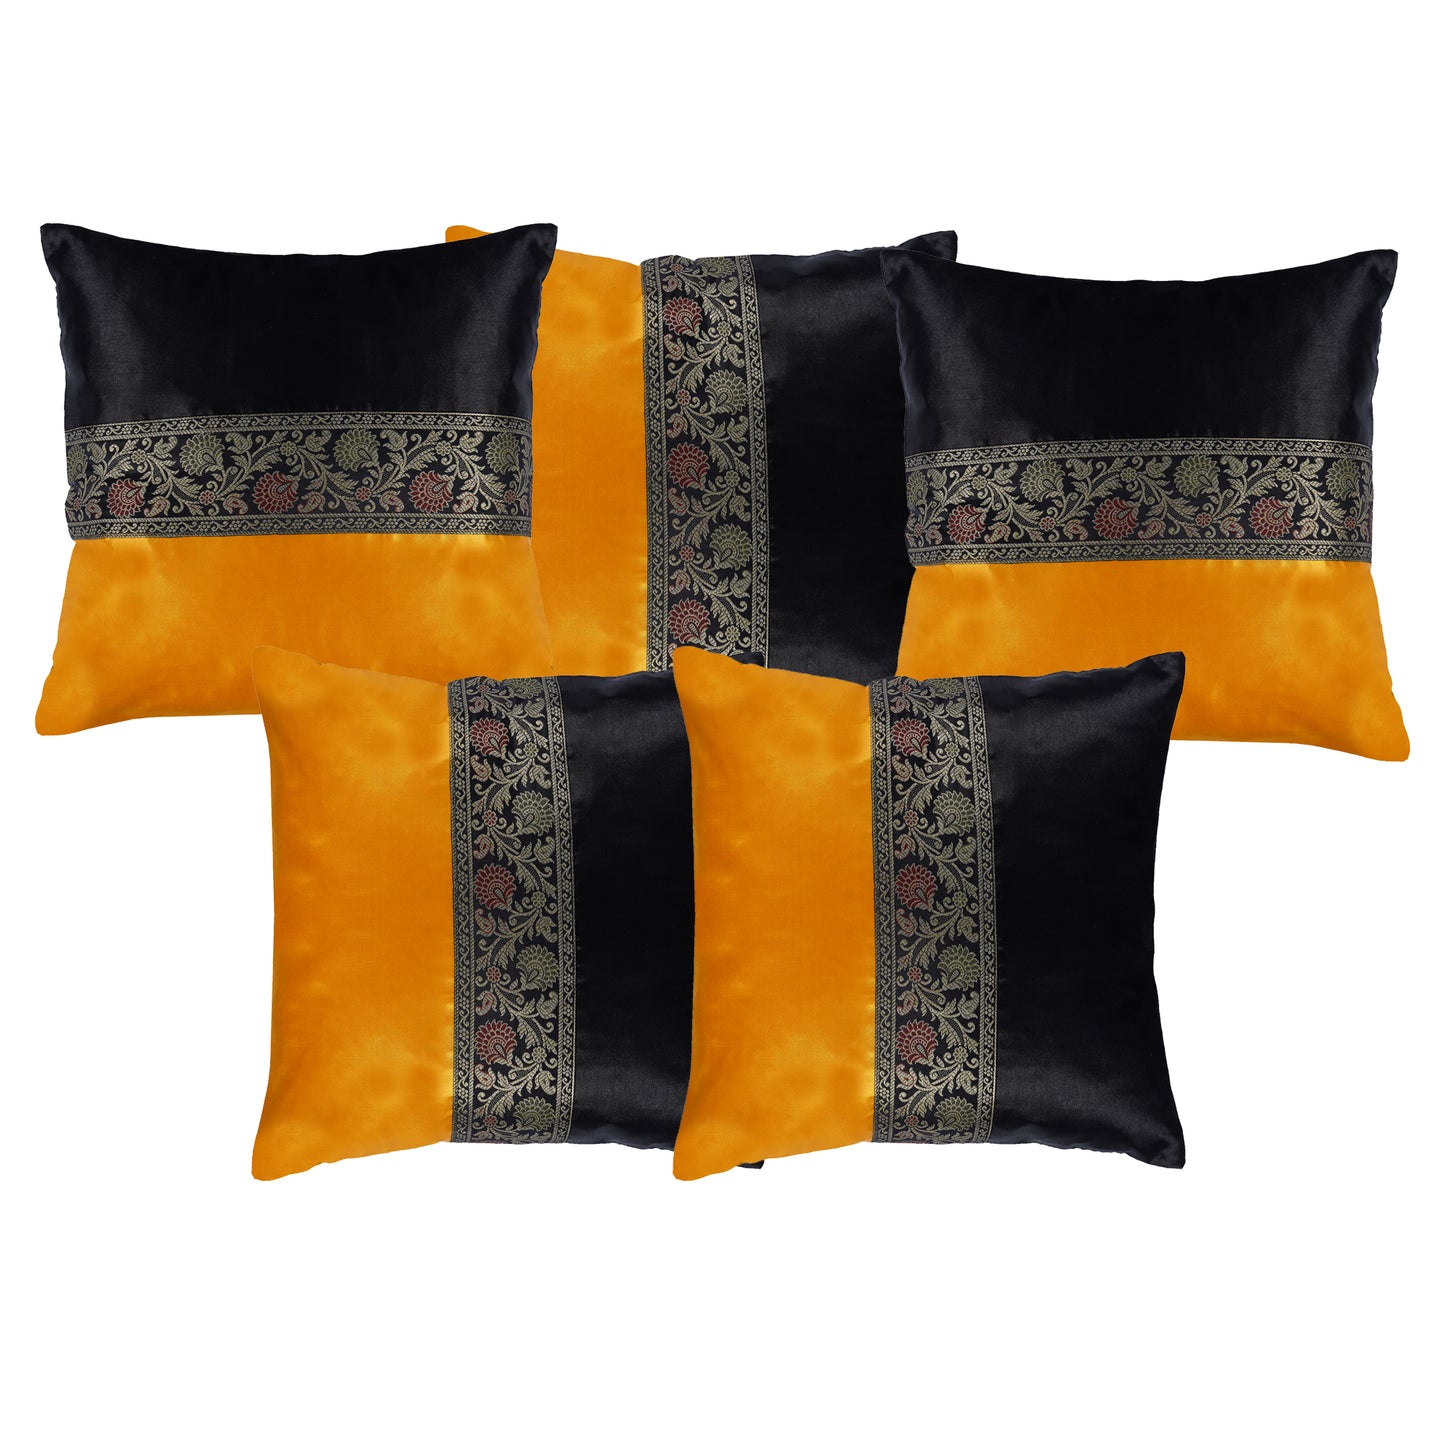 Set of 2 Pc Indian Solid Soft Silky Satin Black & Yellow Cushion Covers Square Throw Decorative Pillowcases for Couch Sofa Home Décor 16X16 In